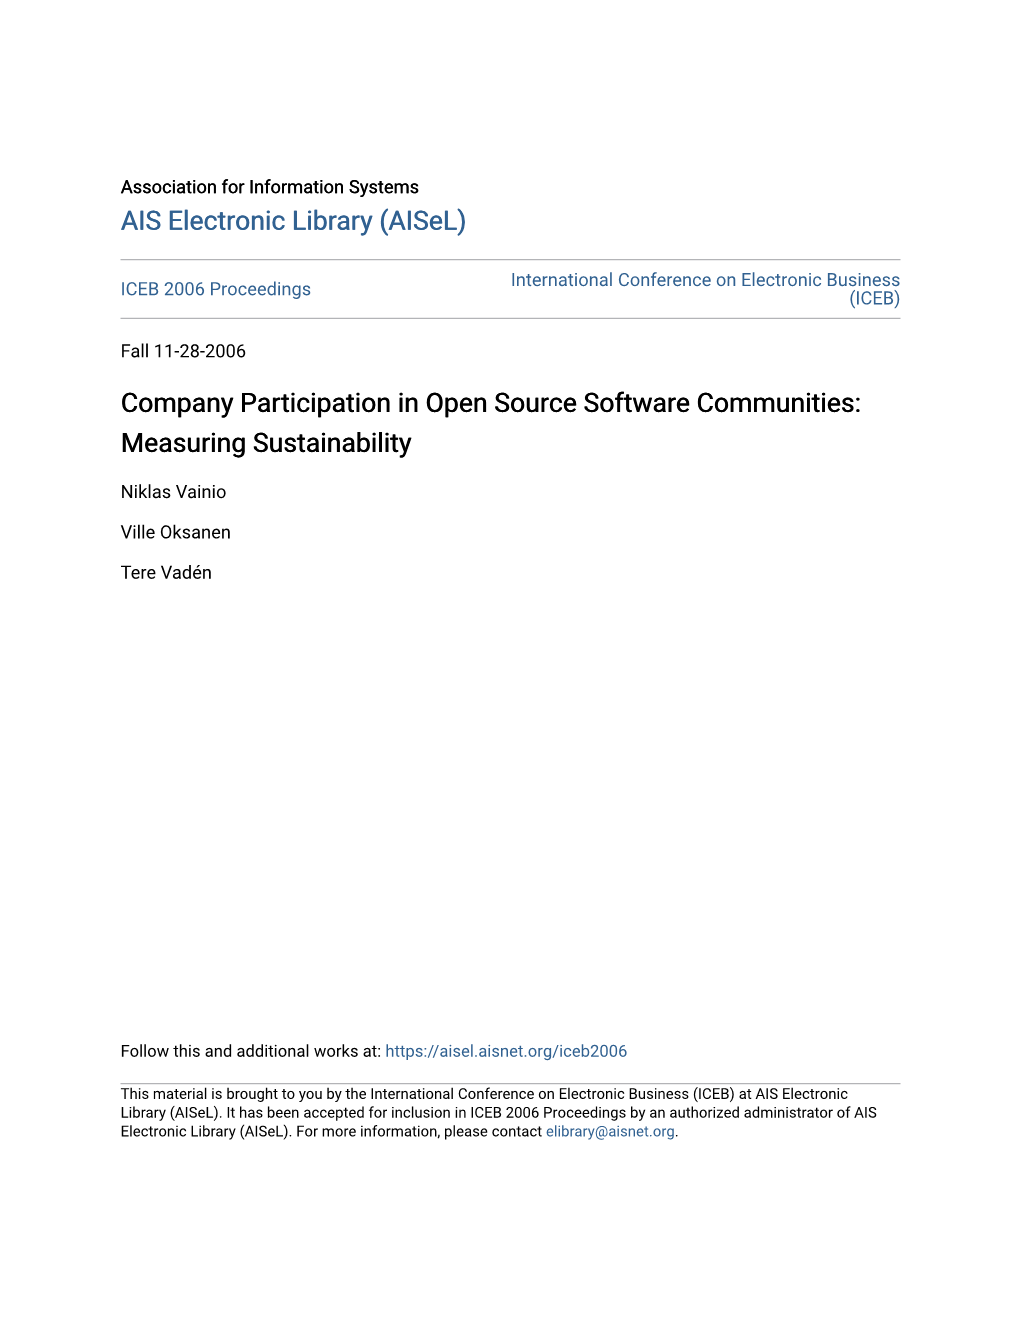 Company Participation in Open Source Software Communities: Measuring Sustainability